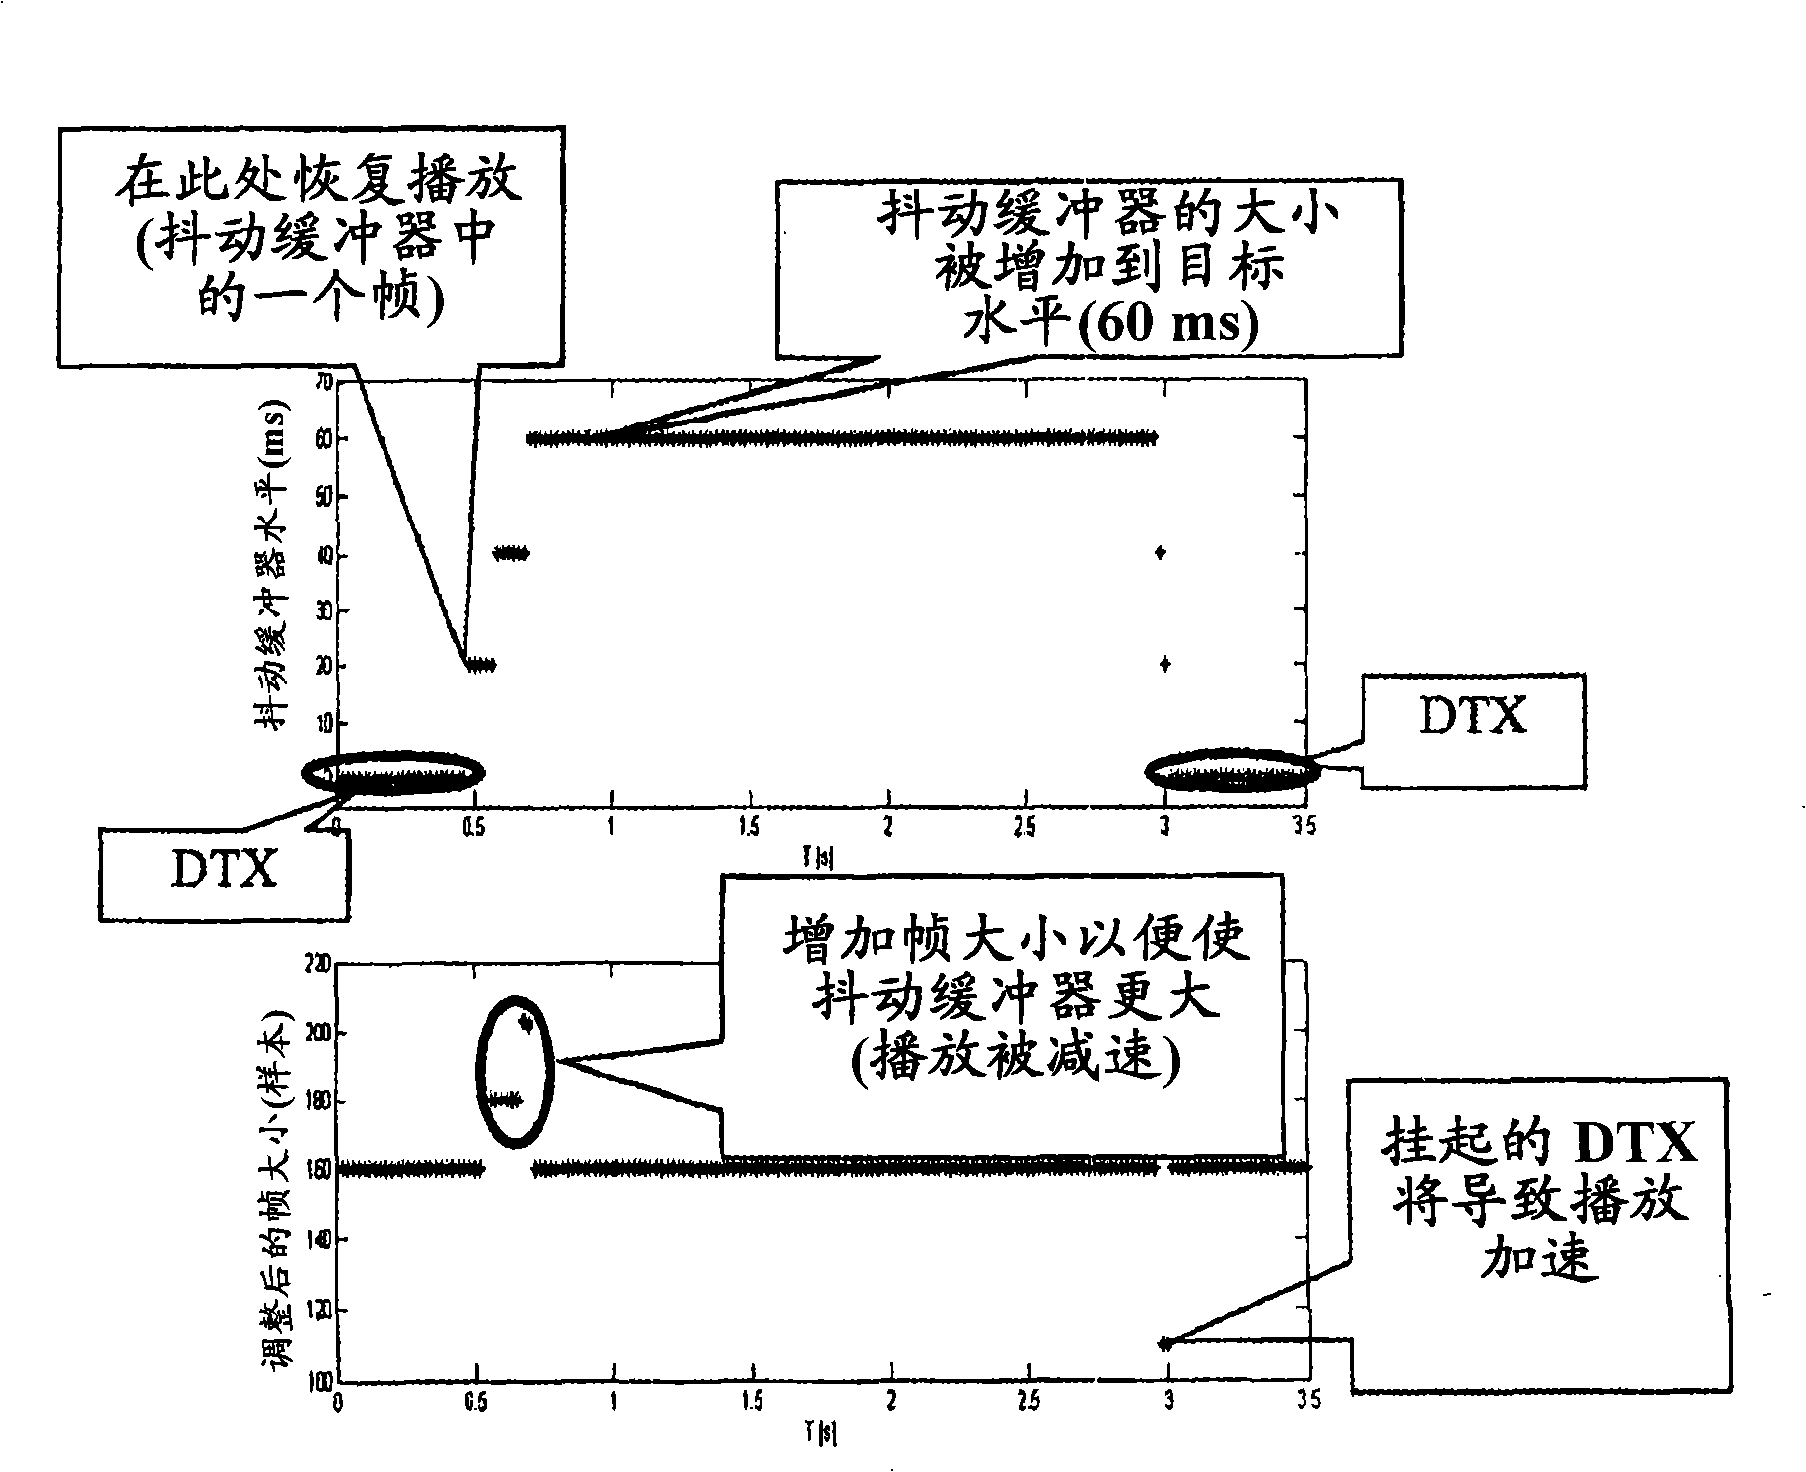 Method and device for mobile telecommunication network